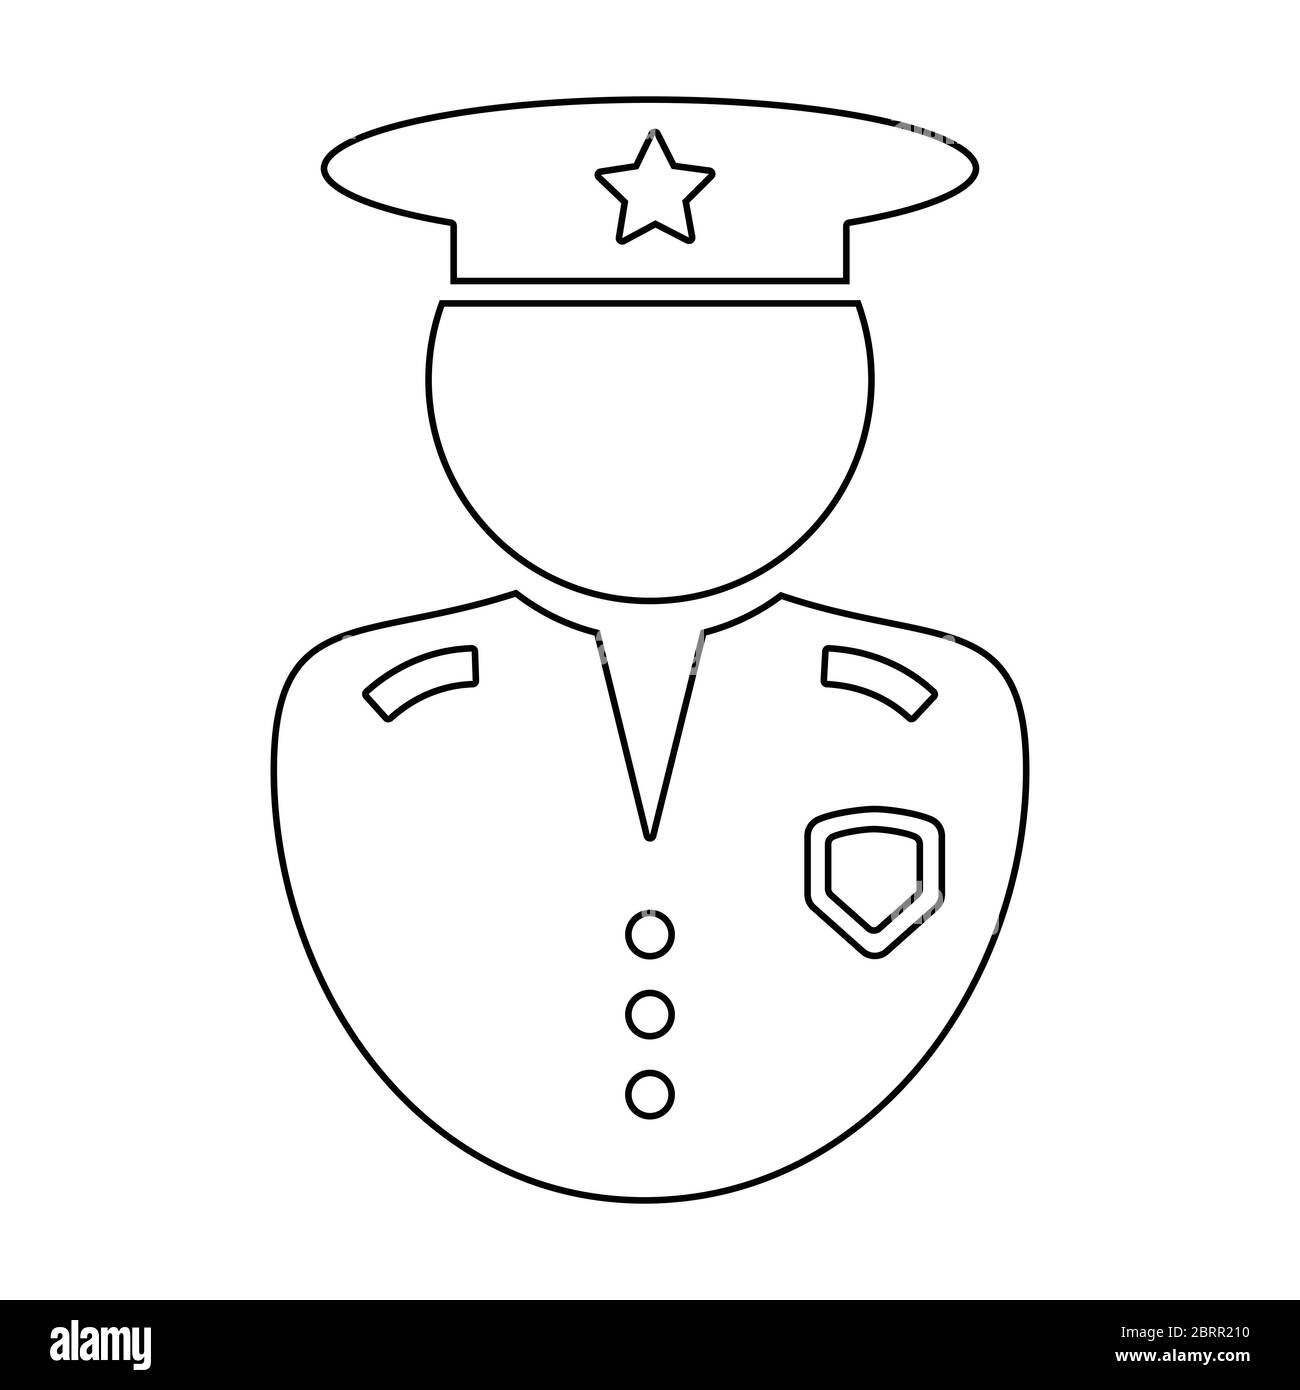 Police Officer Outline Icon. Black and white illustration pictogram icon depicting uniformed law enforcement officer with hat and badge. EPS Vector Stock Vector